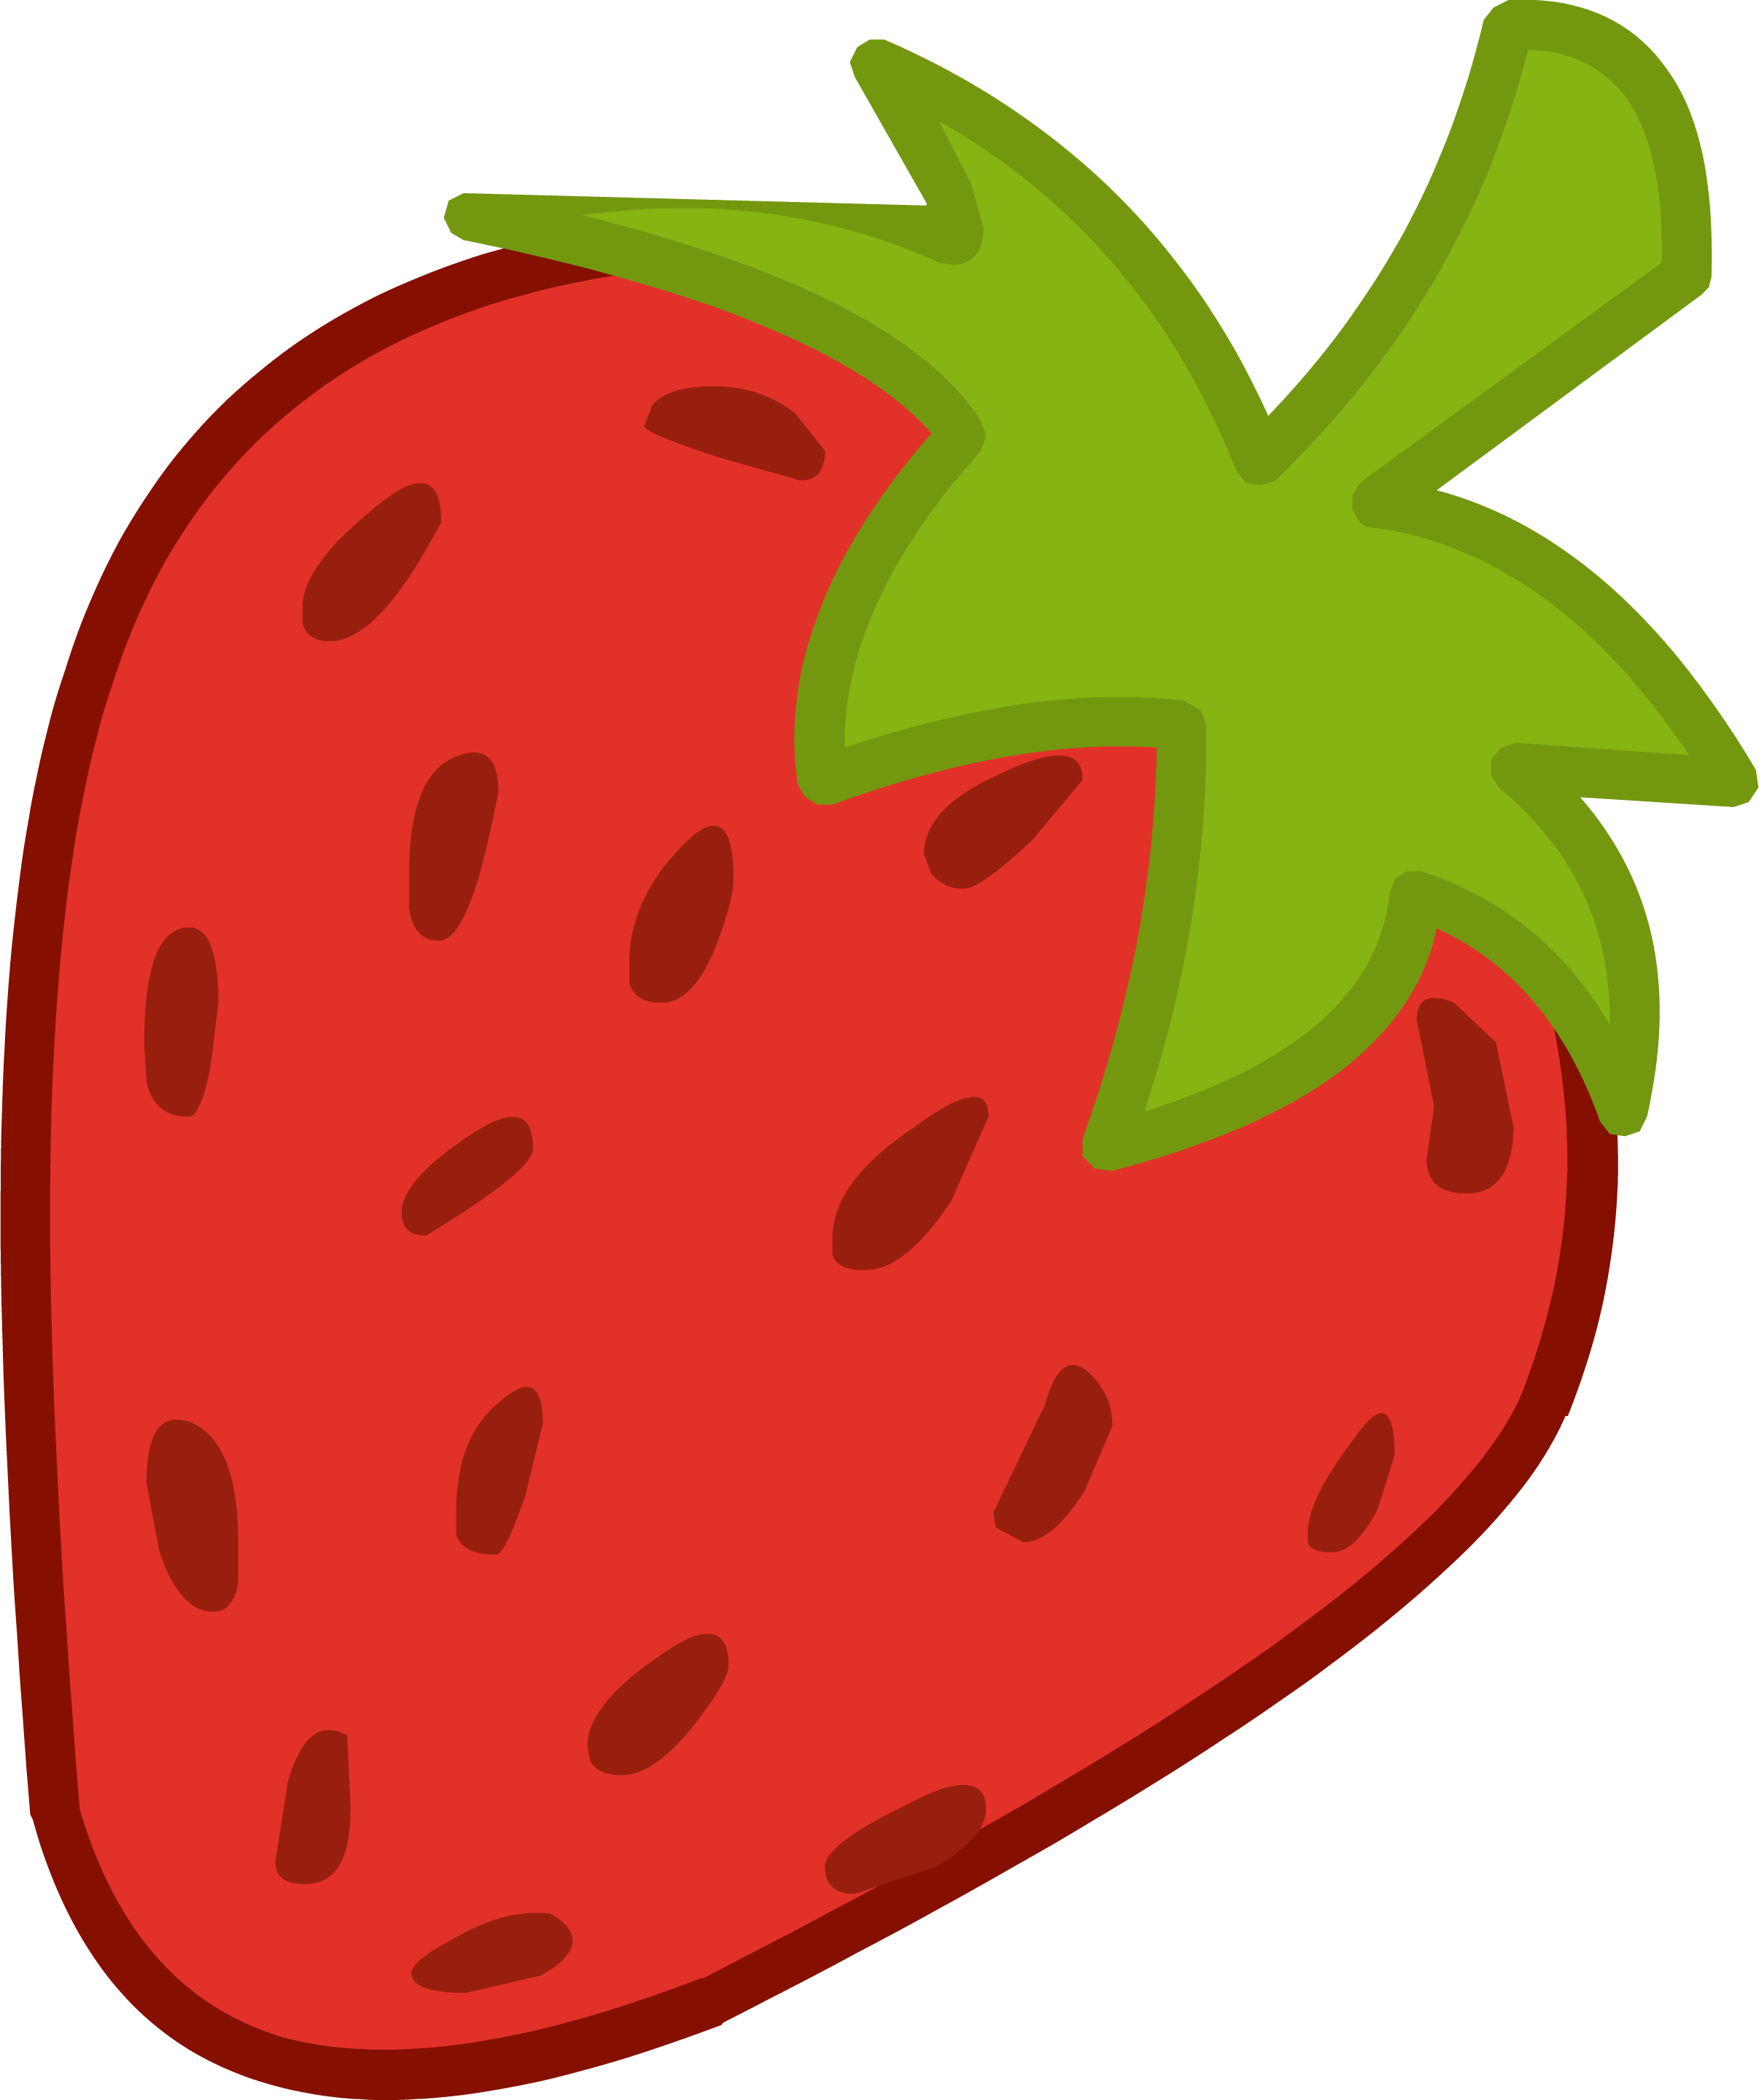 strawberry clip art pictures - photo #7